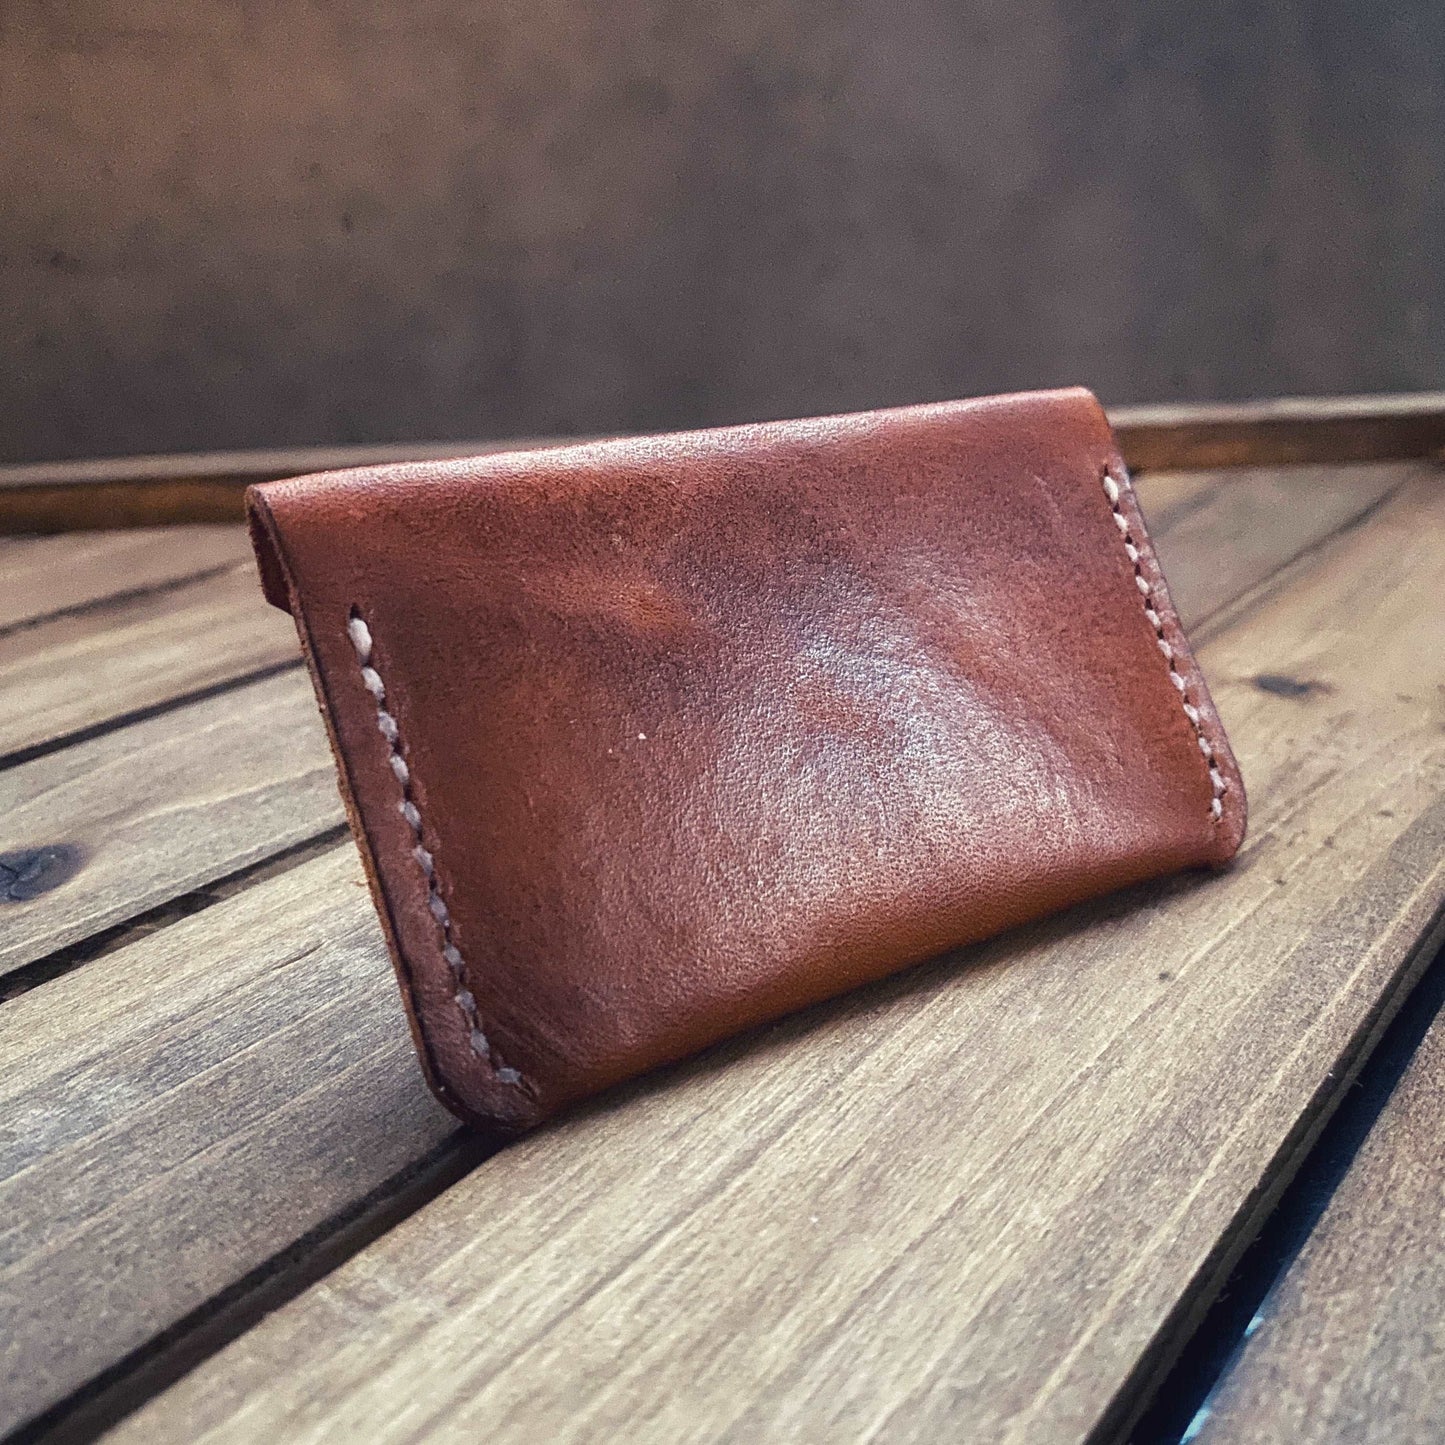 The back of a flap top leather card holder in saddle tan with white stitching sitting on a dark wood platform.